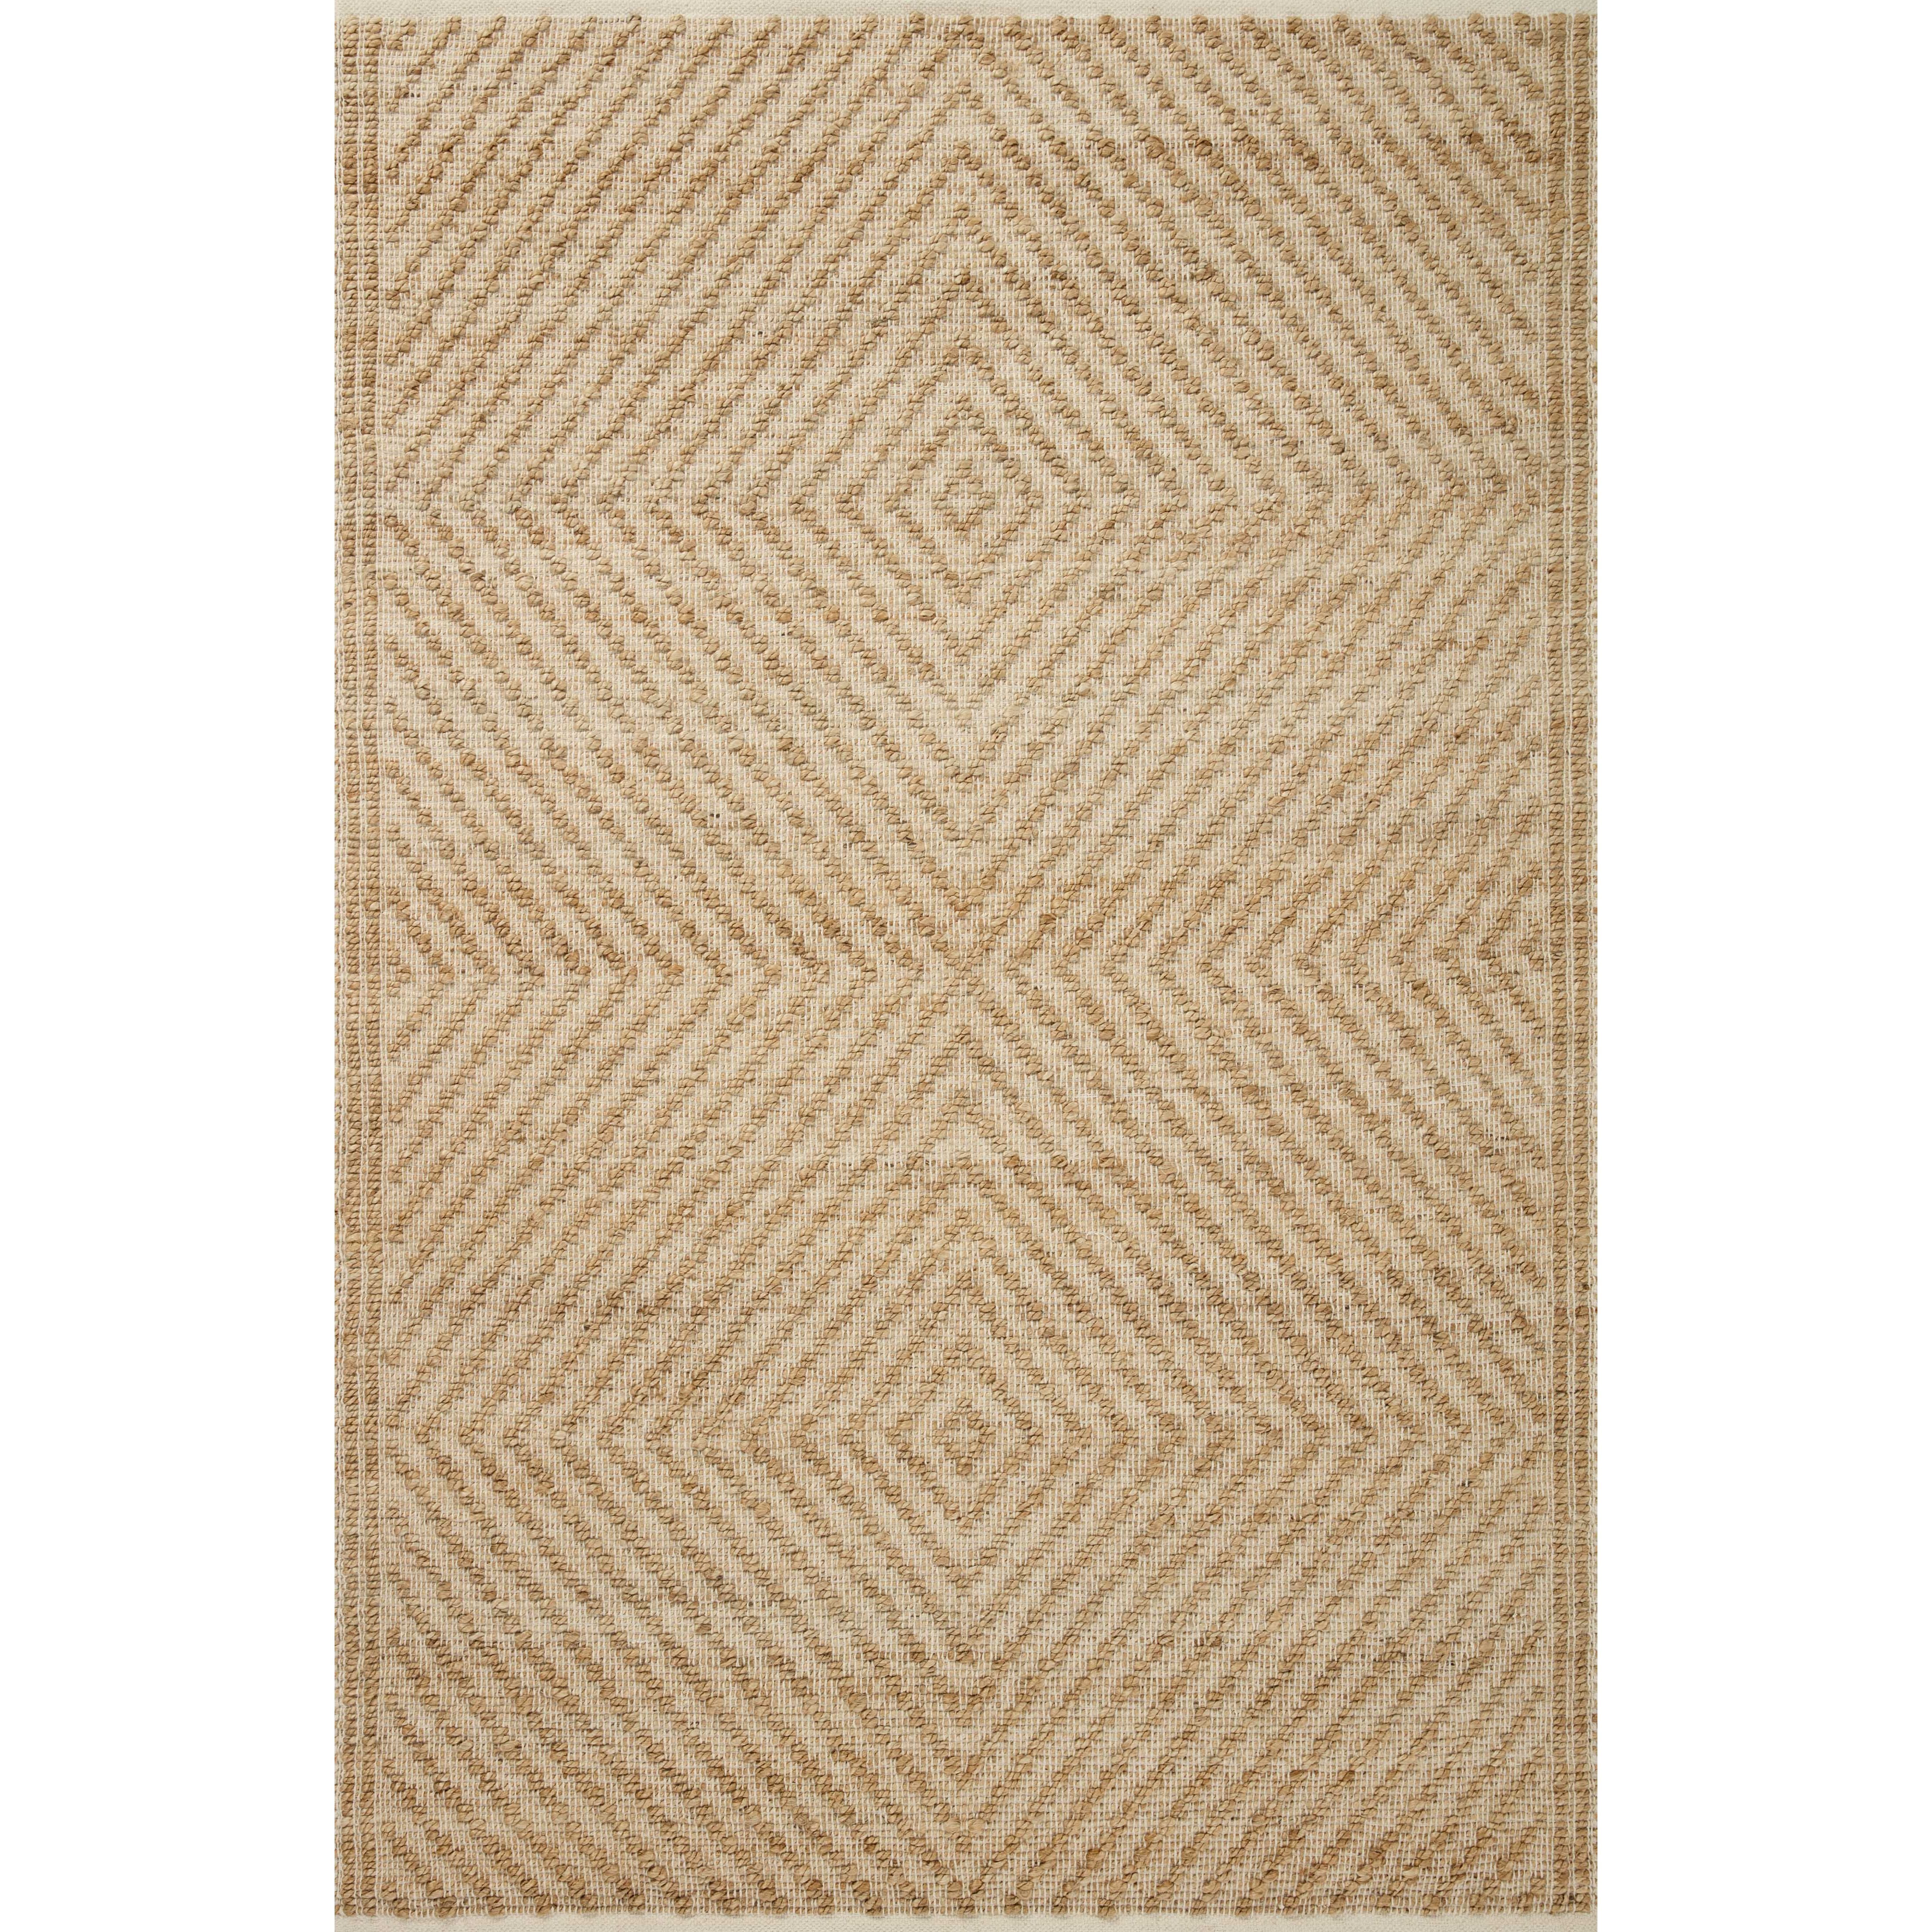 The Angela Rose x Loloi Colton Natural / Ivory Rug is a new take on the staple jute rug, blended with cotton for added softness. In a range of linear designs in modern earth tones, Colton can add visual interest to a room or serve as a gently textured neutral. Amethyst Home provides interior design services, furniture, rugs, and lighting in the Portland metro area.